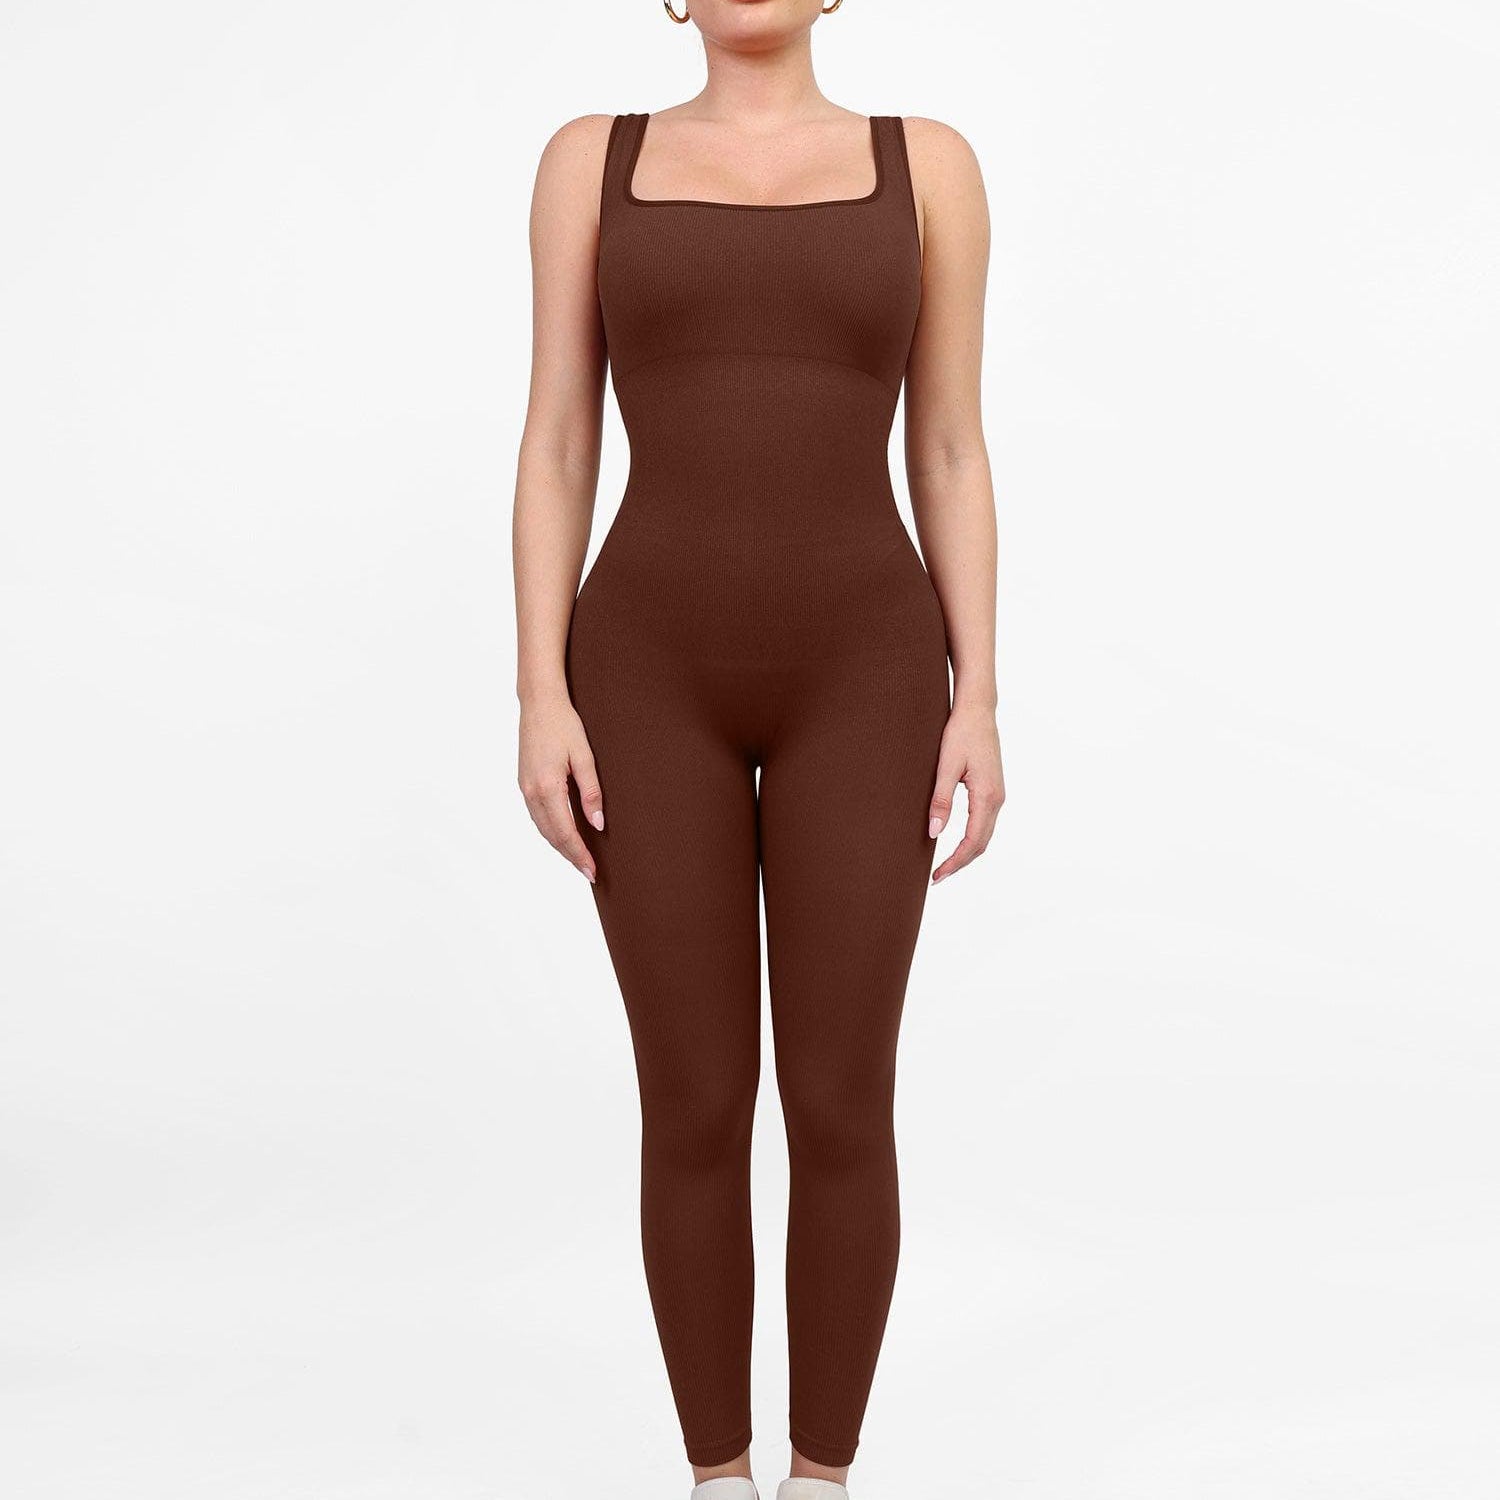  S Seamless Square Neck One Piece Sport Jumpsuit